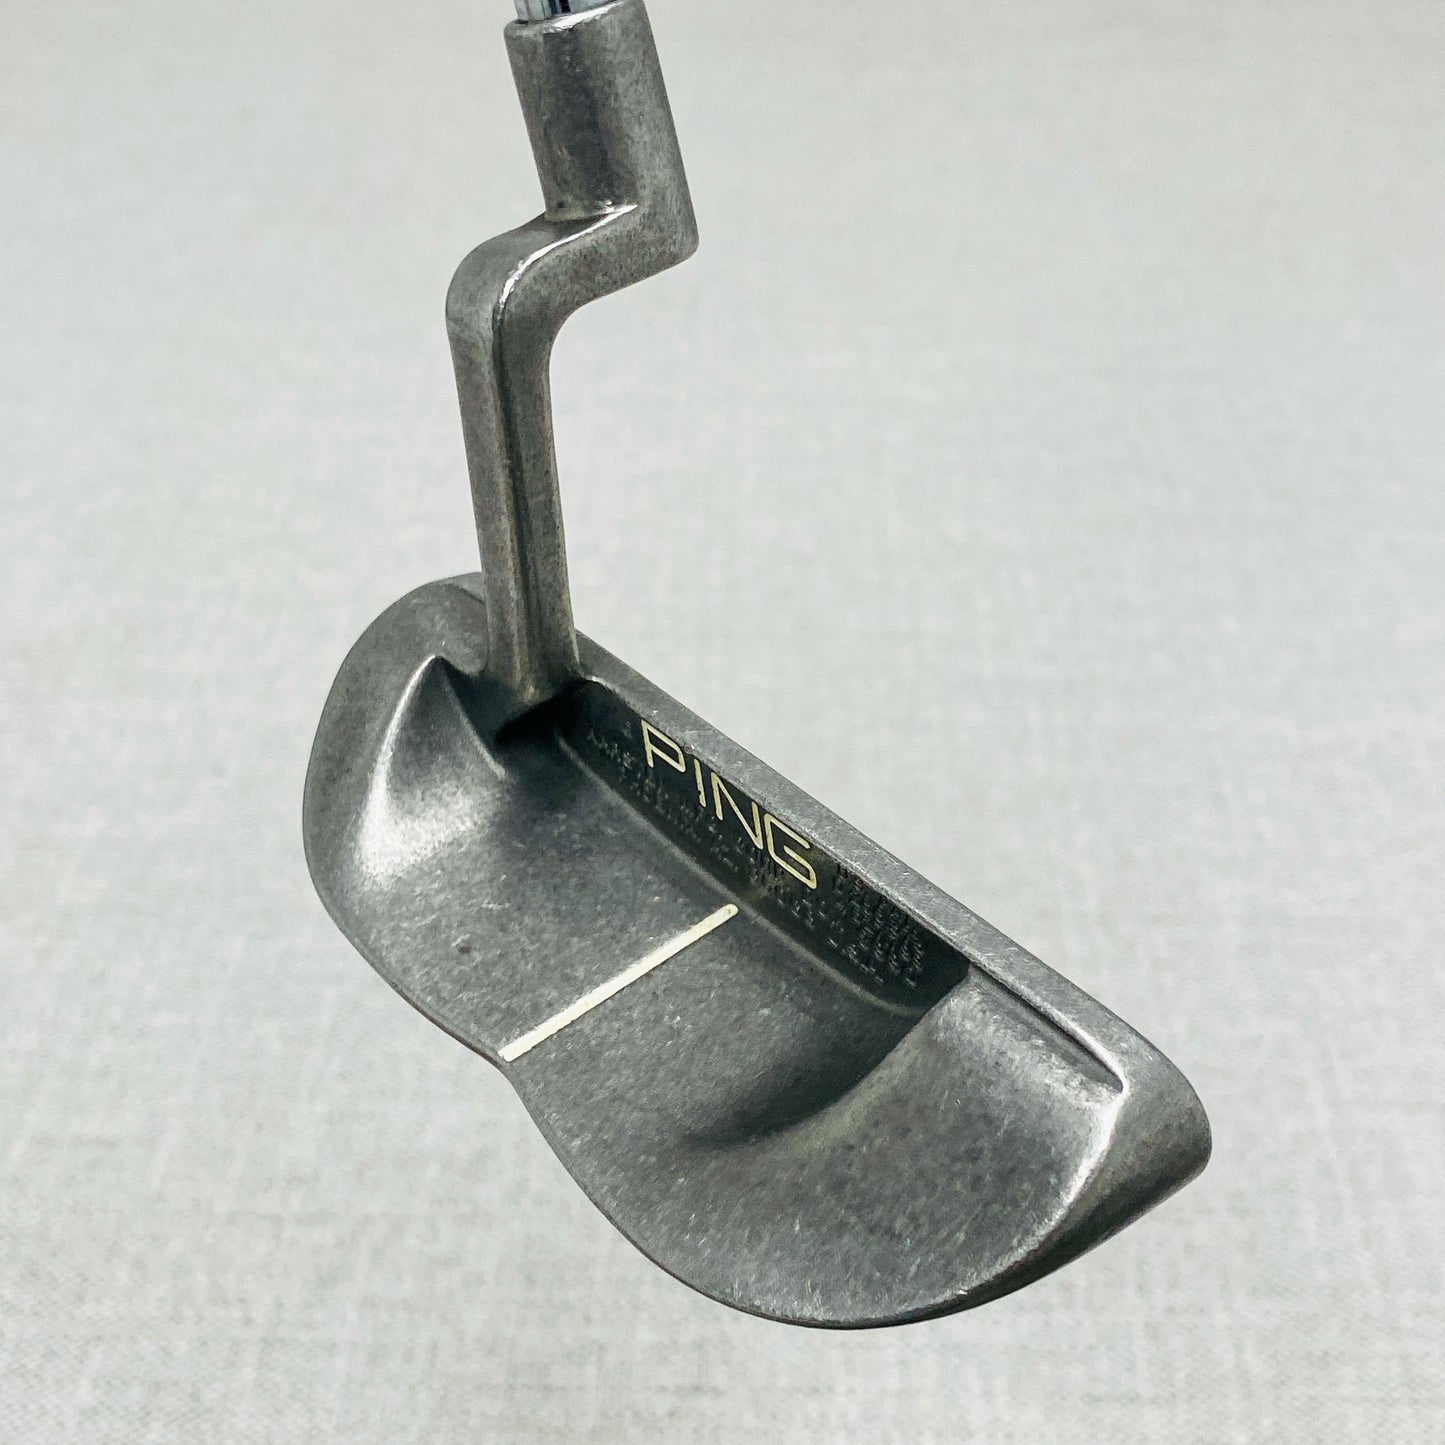 PING B60 Stainless Putter. 33 inch - Very Good Condition # T1009